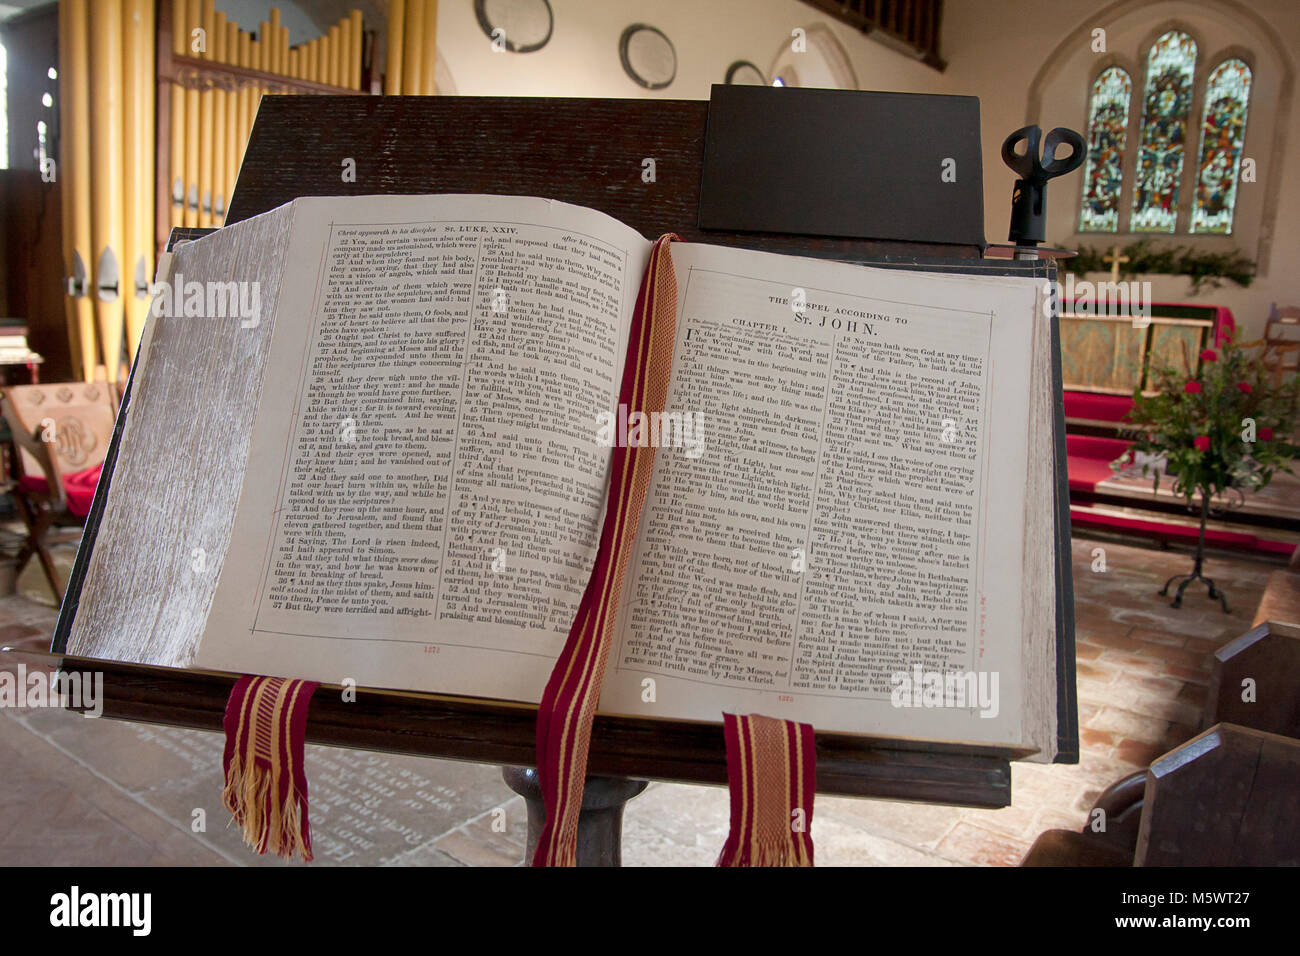 Holy Bible open on the pages Gospel According to St John, St Mary's church, Michelmersh,Test Valley, near Salisbury, Hampshire, England Stock Photo